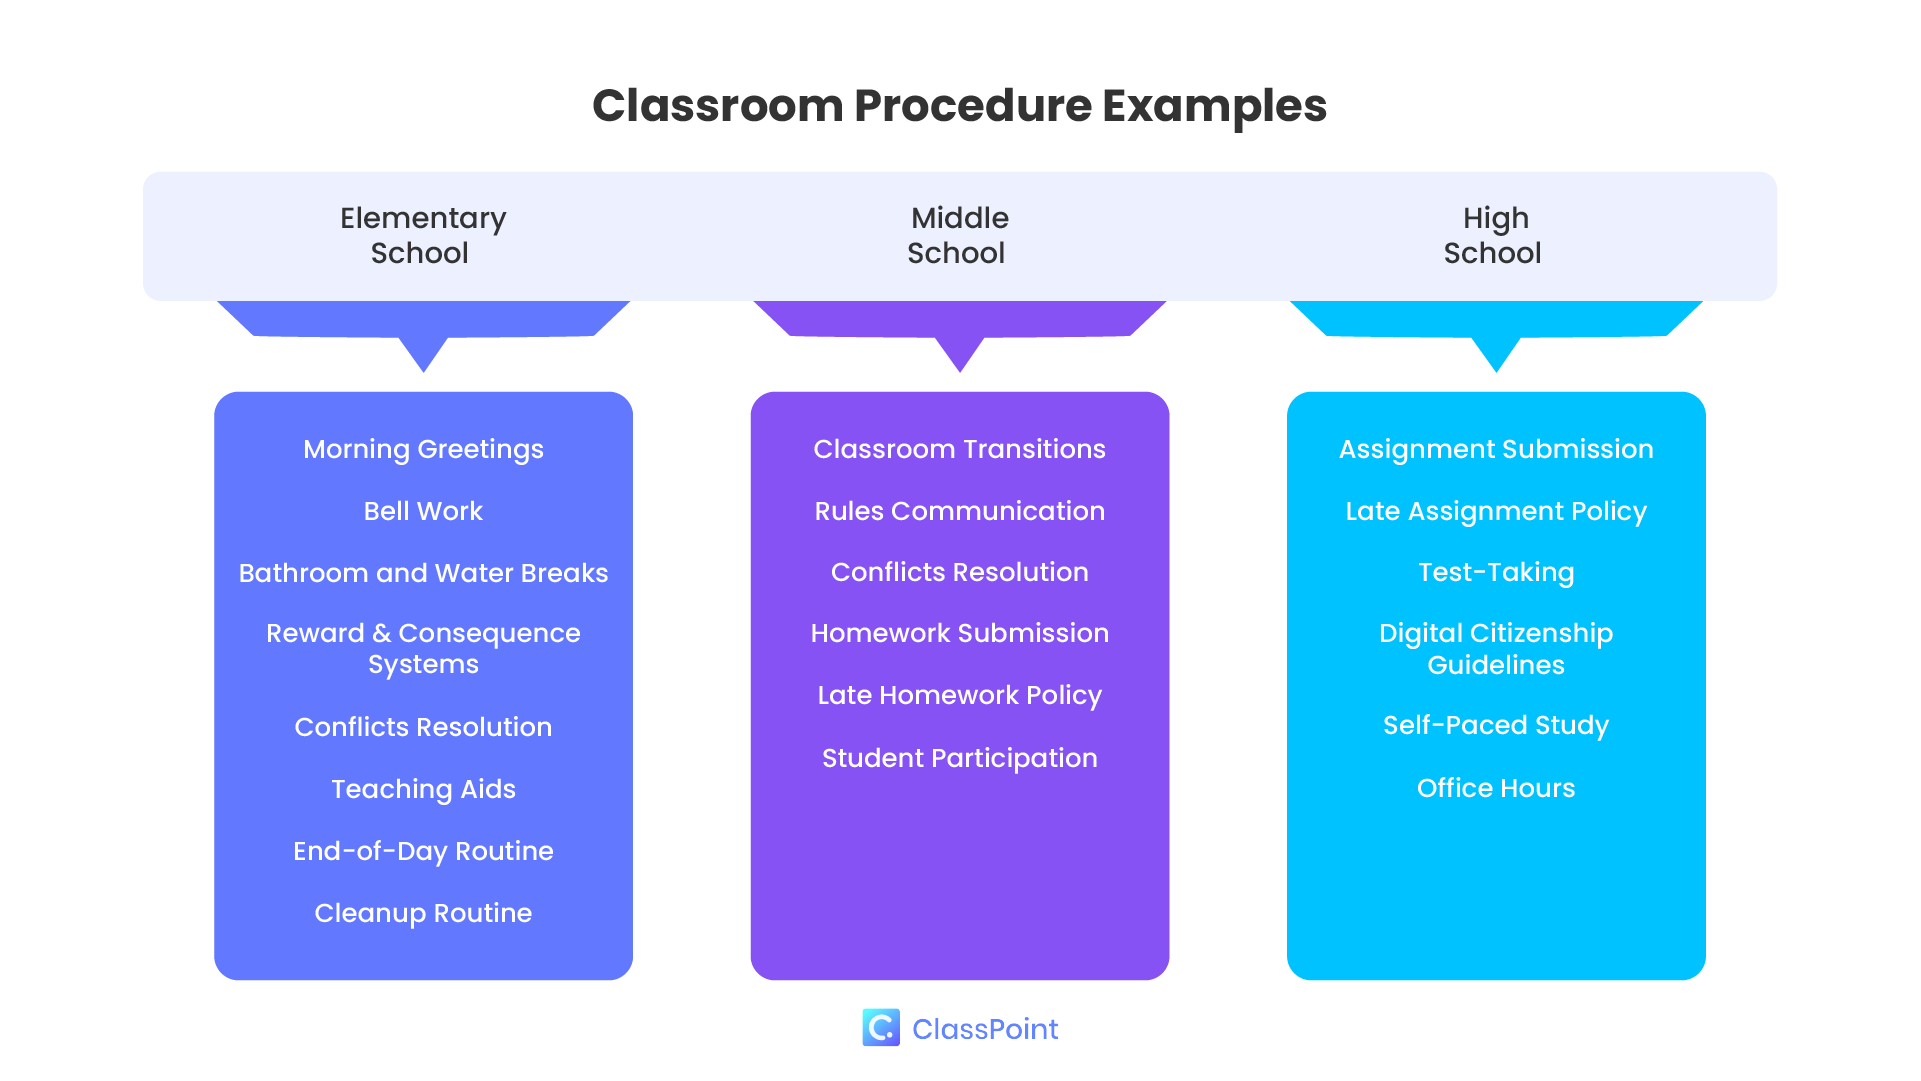 Classroom Procedures for Elementary, Middle and High Schools